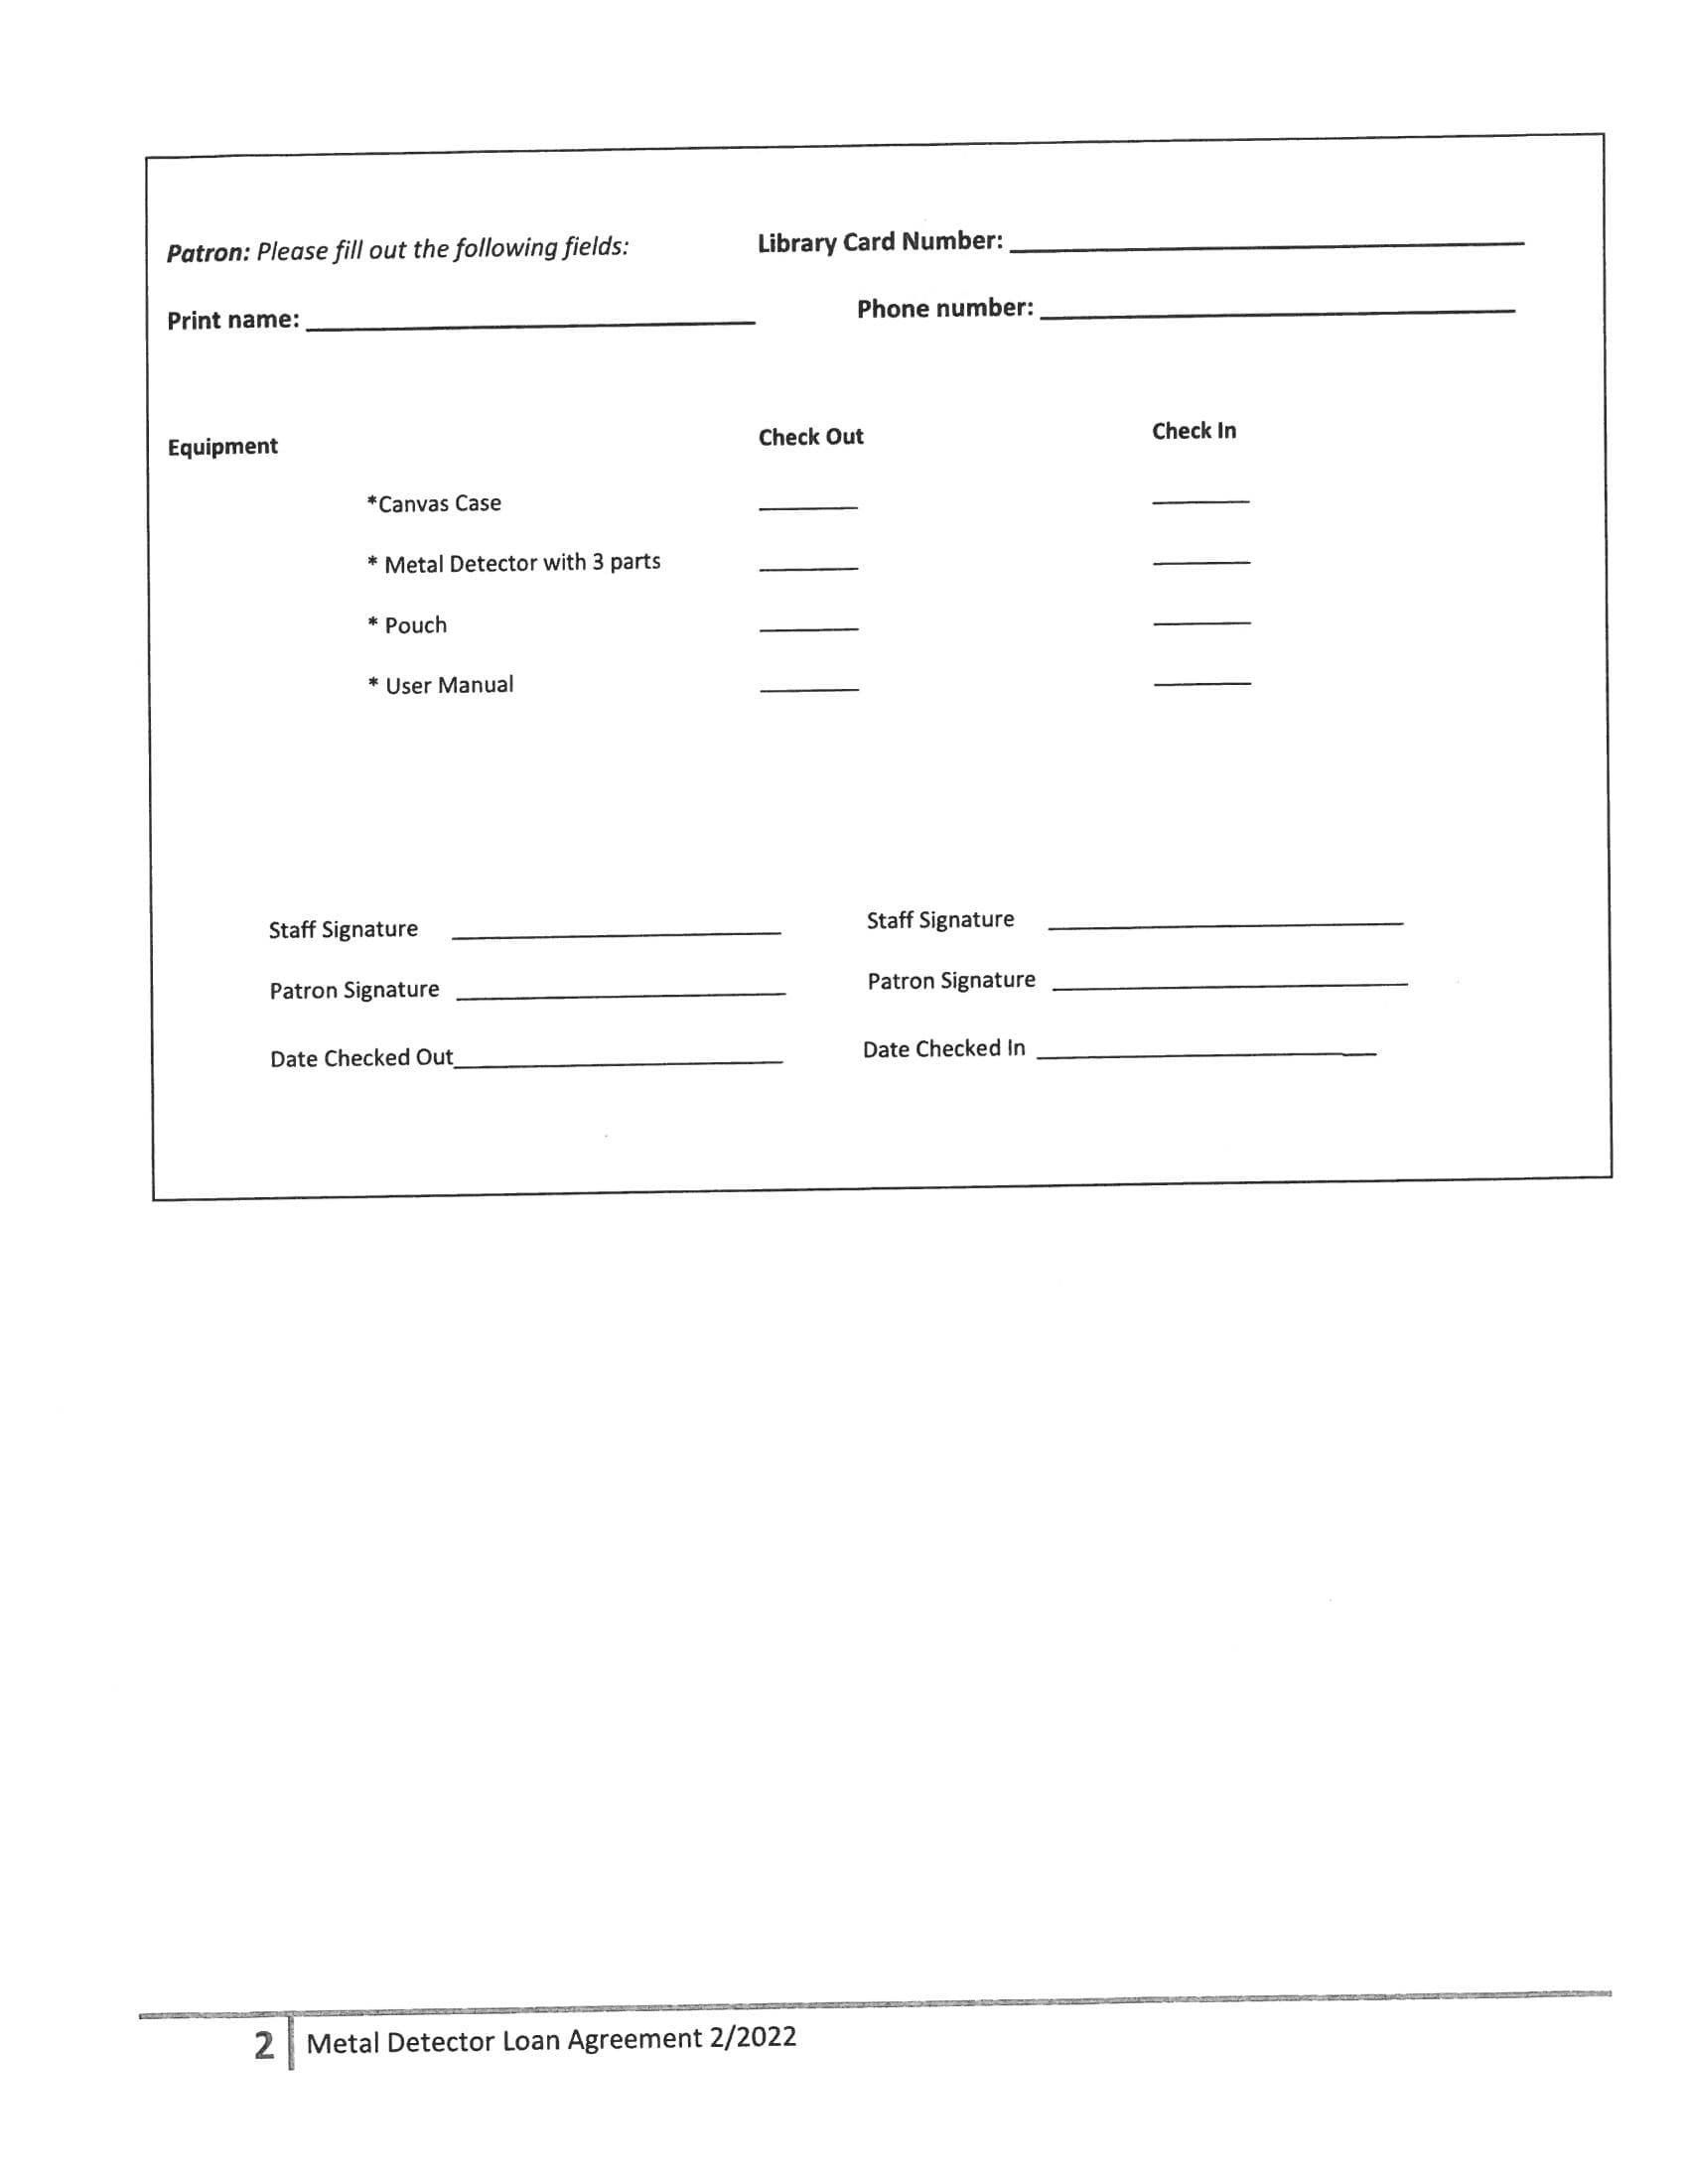 PCDL Metal Detector Loan Agreement page2  call 419-523-3747 ext 3 for more information